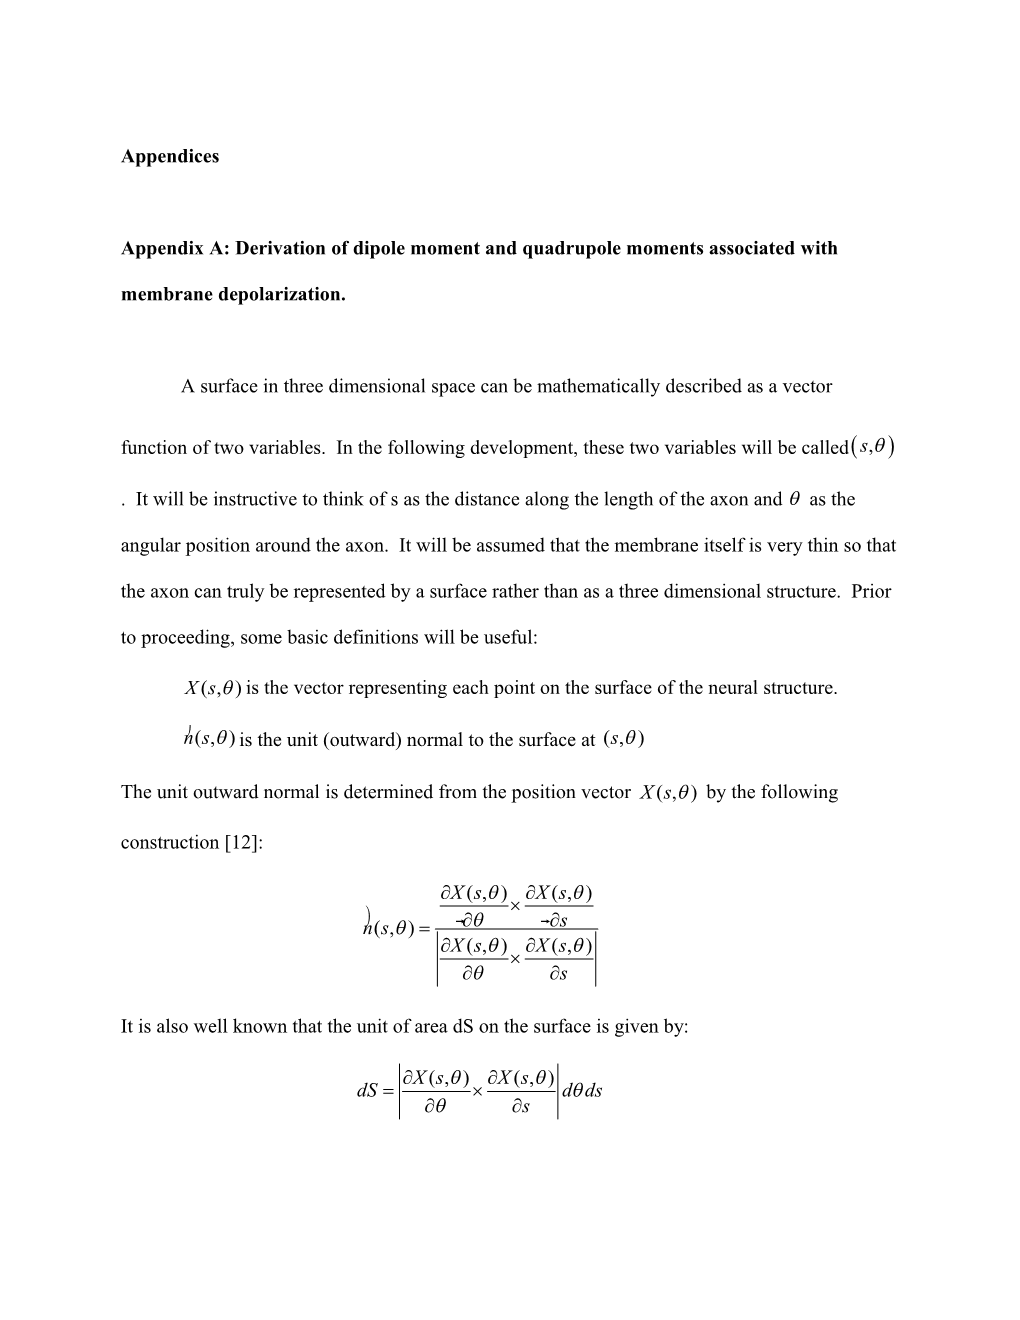 Appendix A: Derivation of Dipole Moment and Quadrupole Moments Associated with Membrane